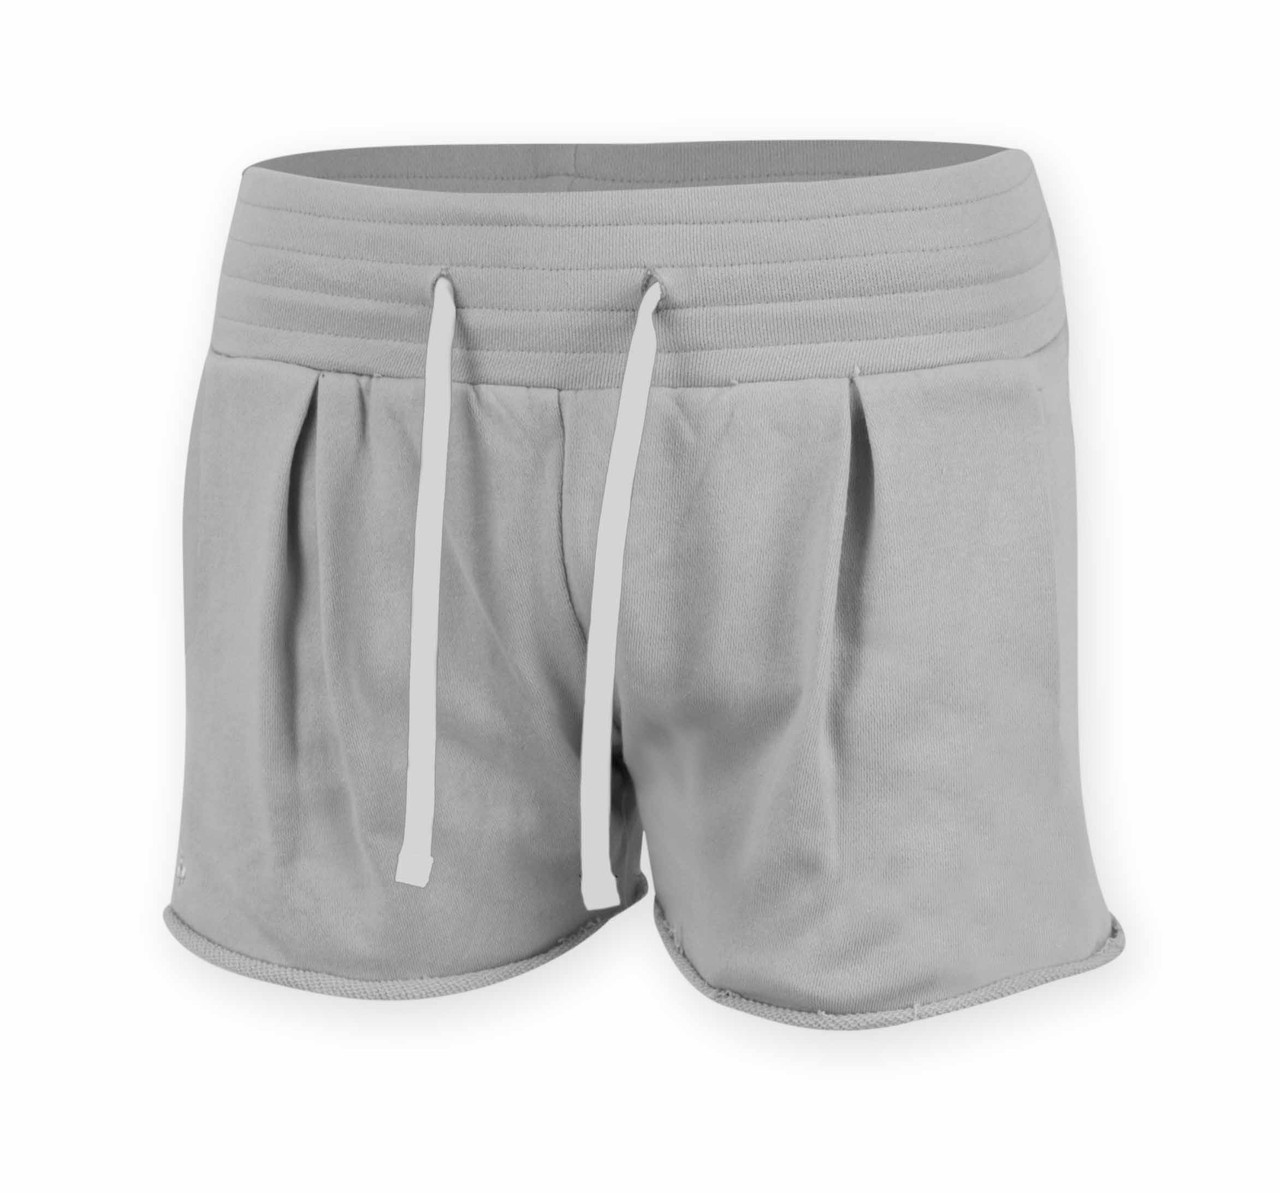 Misty Shorts - AUTHENTIC BRAND